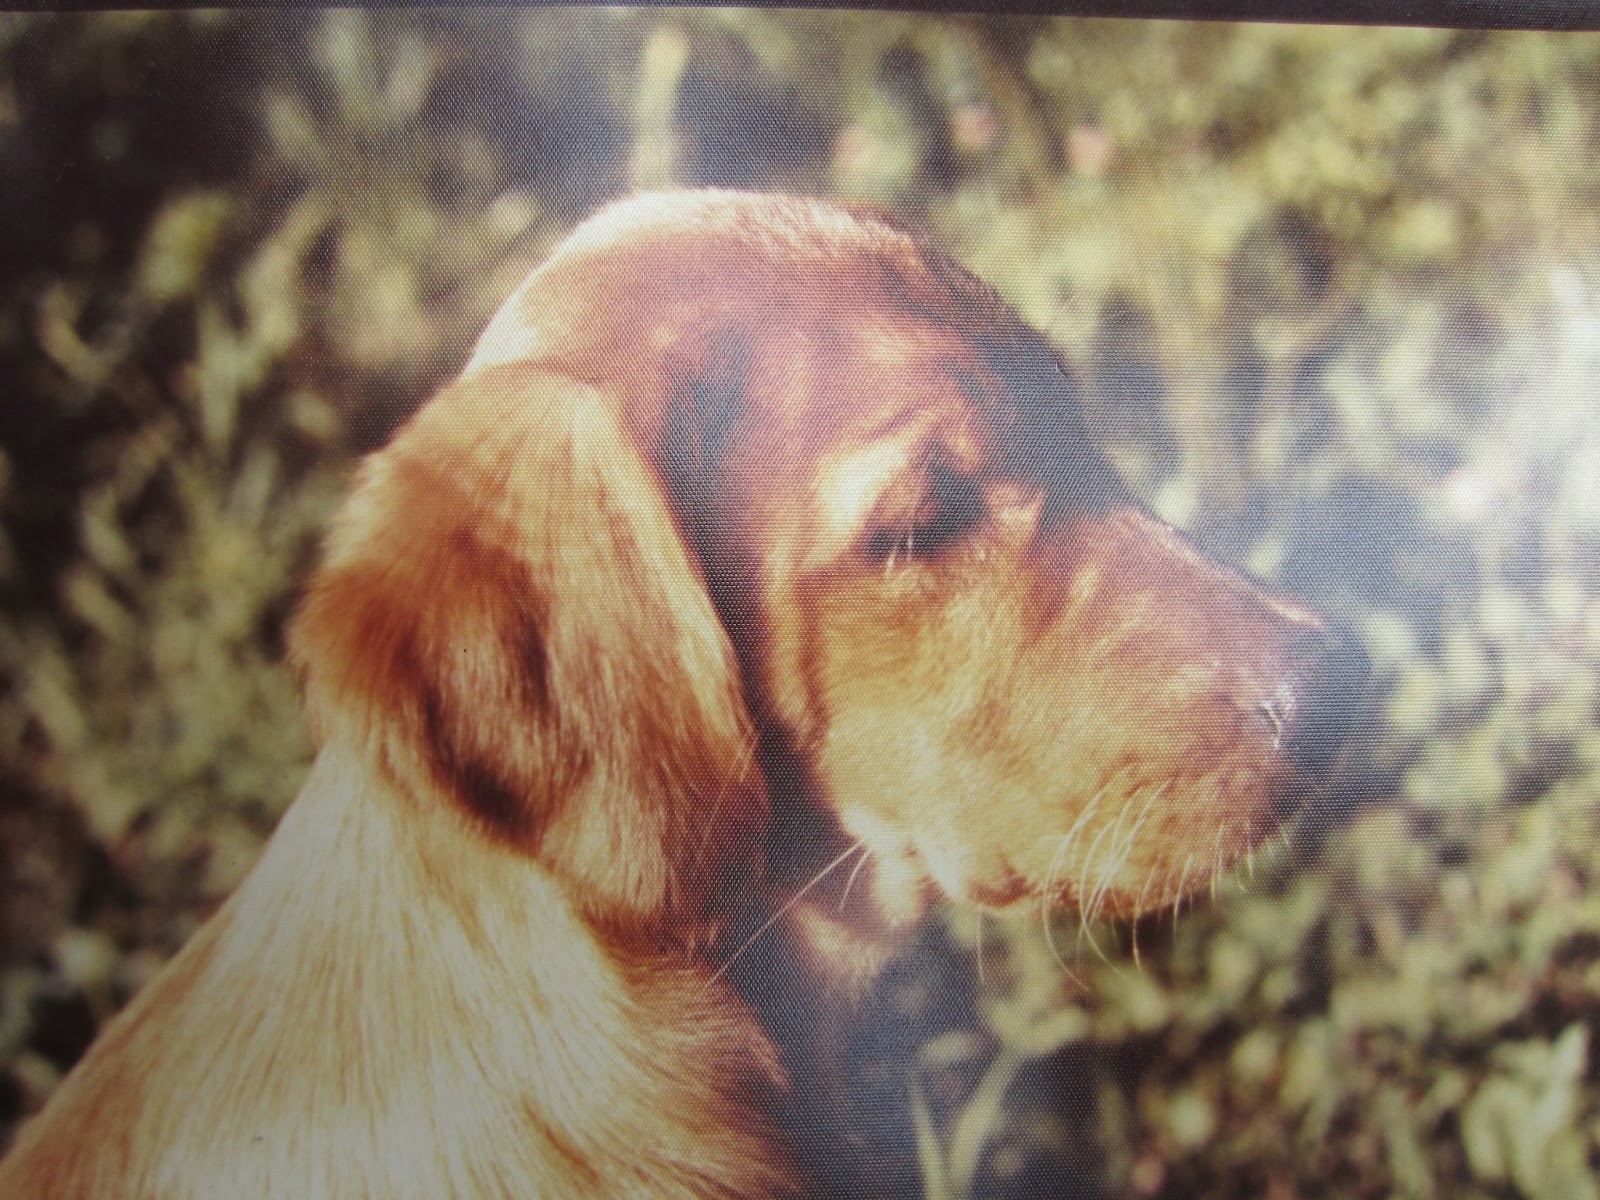 Wrinx the golden retriever in 1977 with a very wrinkled face